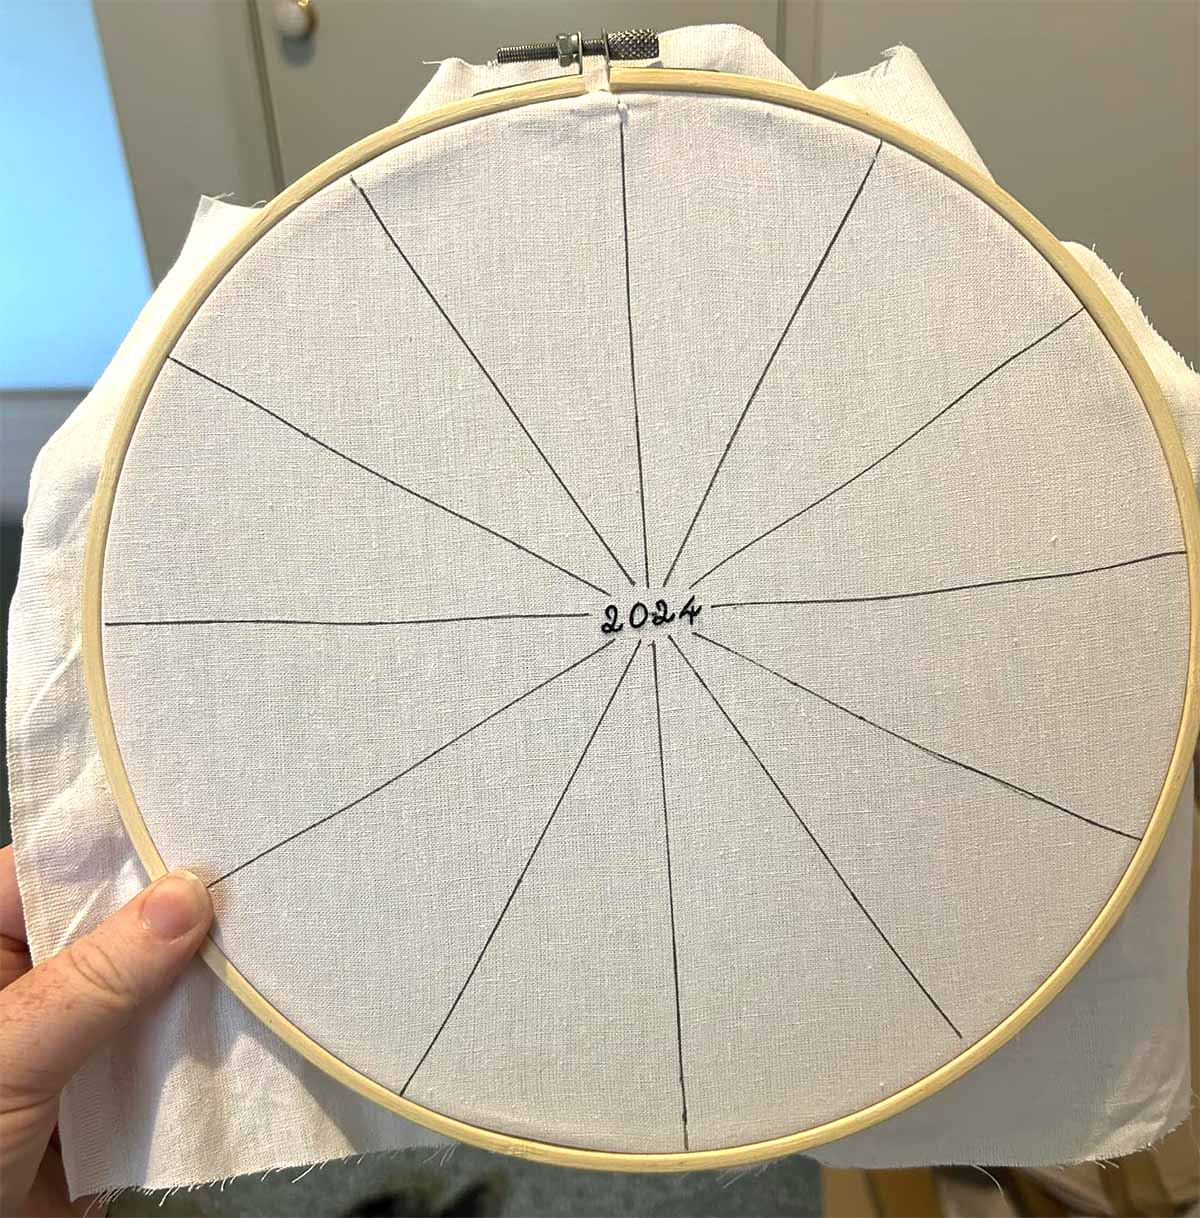 Lines are traced onto an embroidery hoop with the text "2024" stitched in the middle. Everything else is blank.